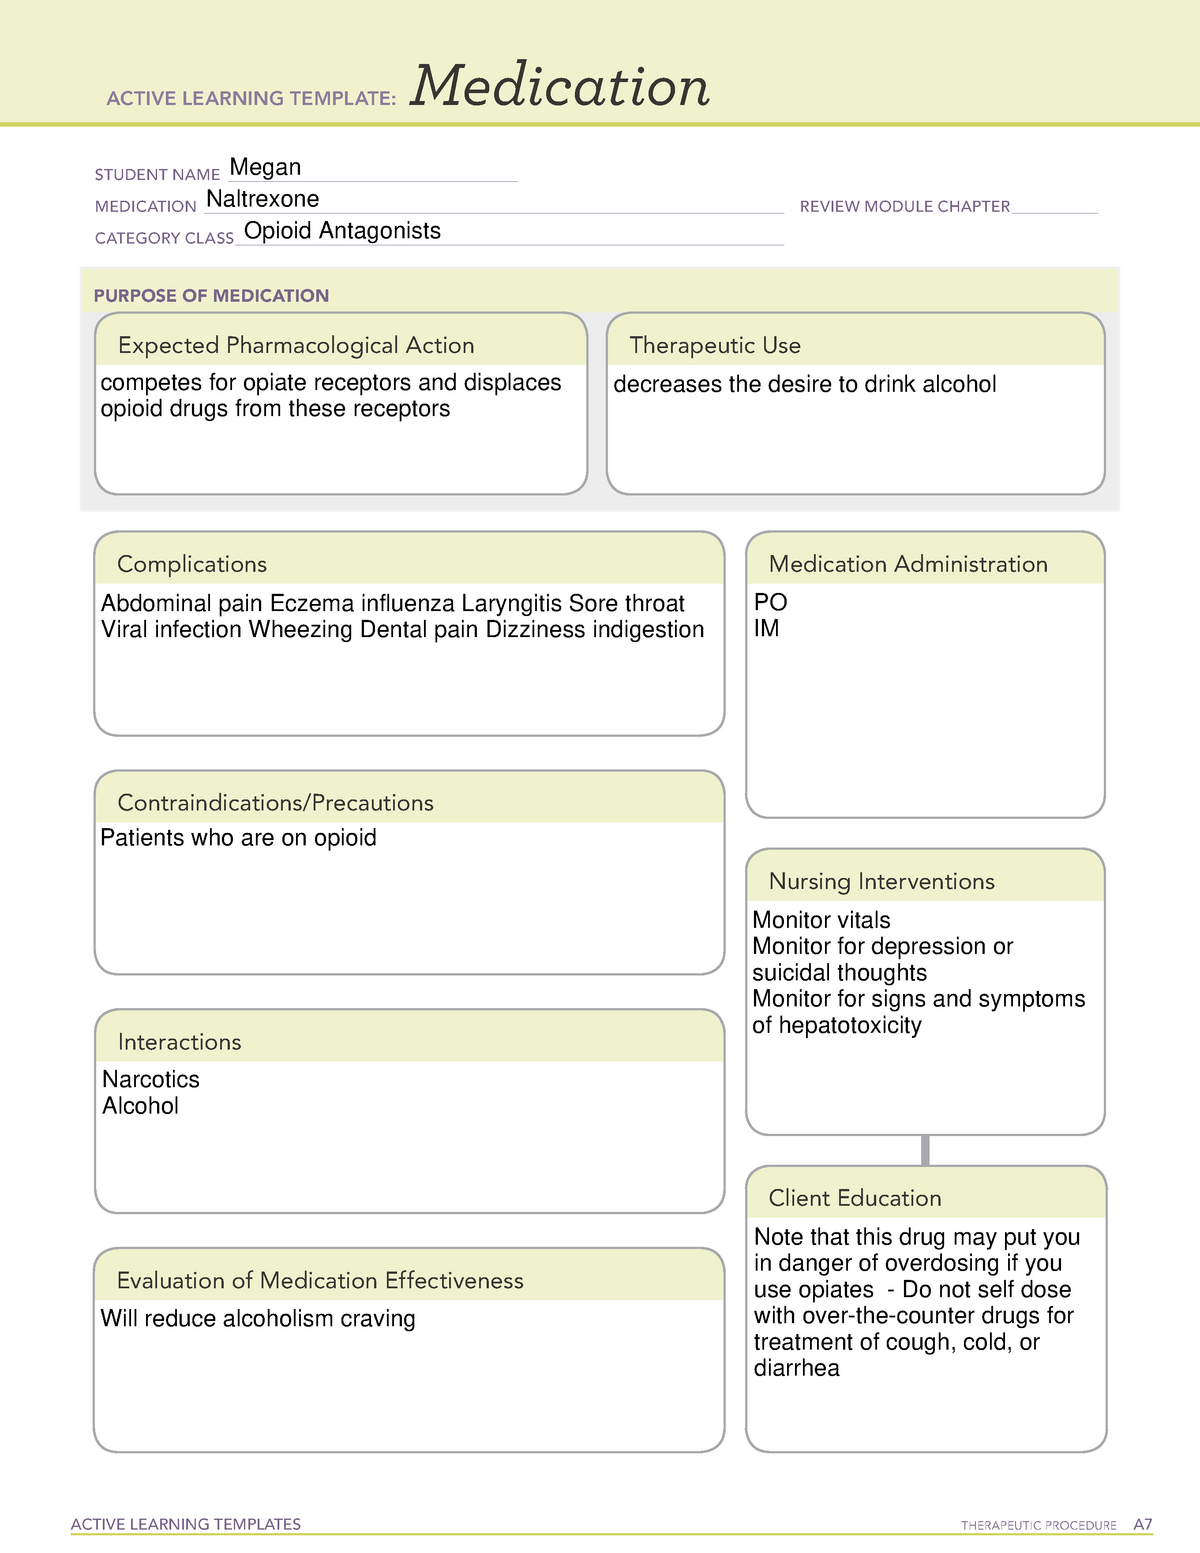 medication-active-learning-template